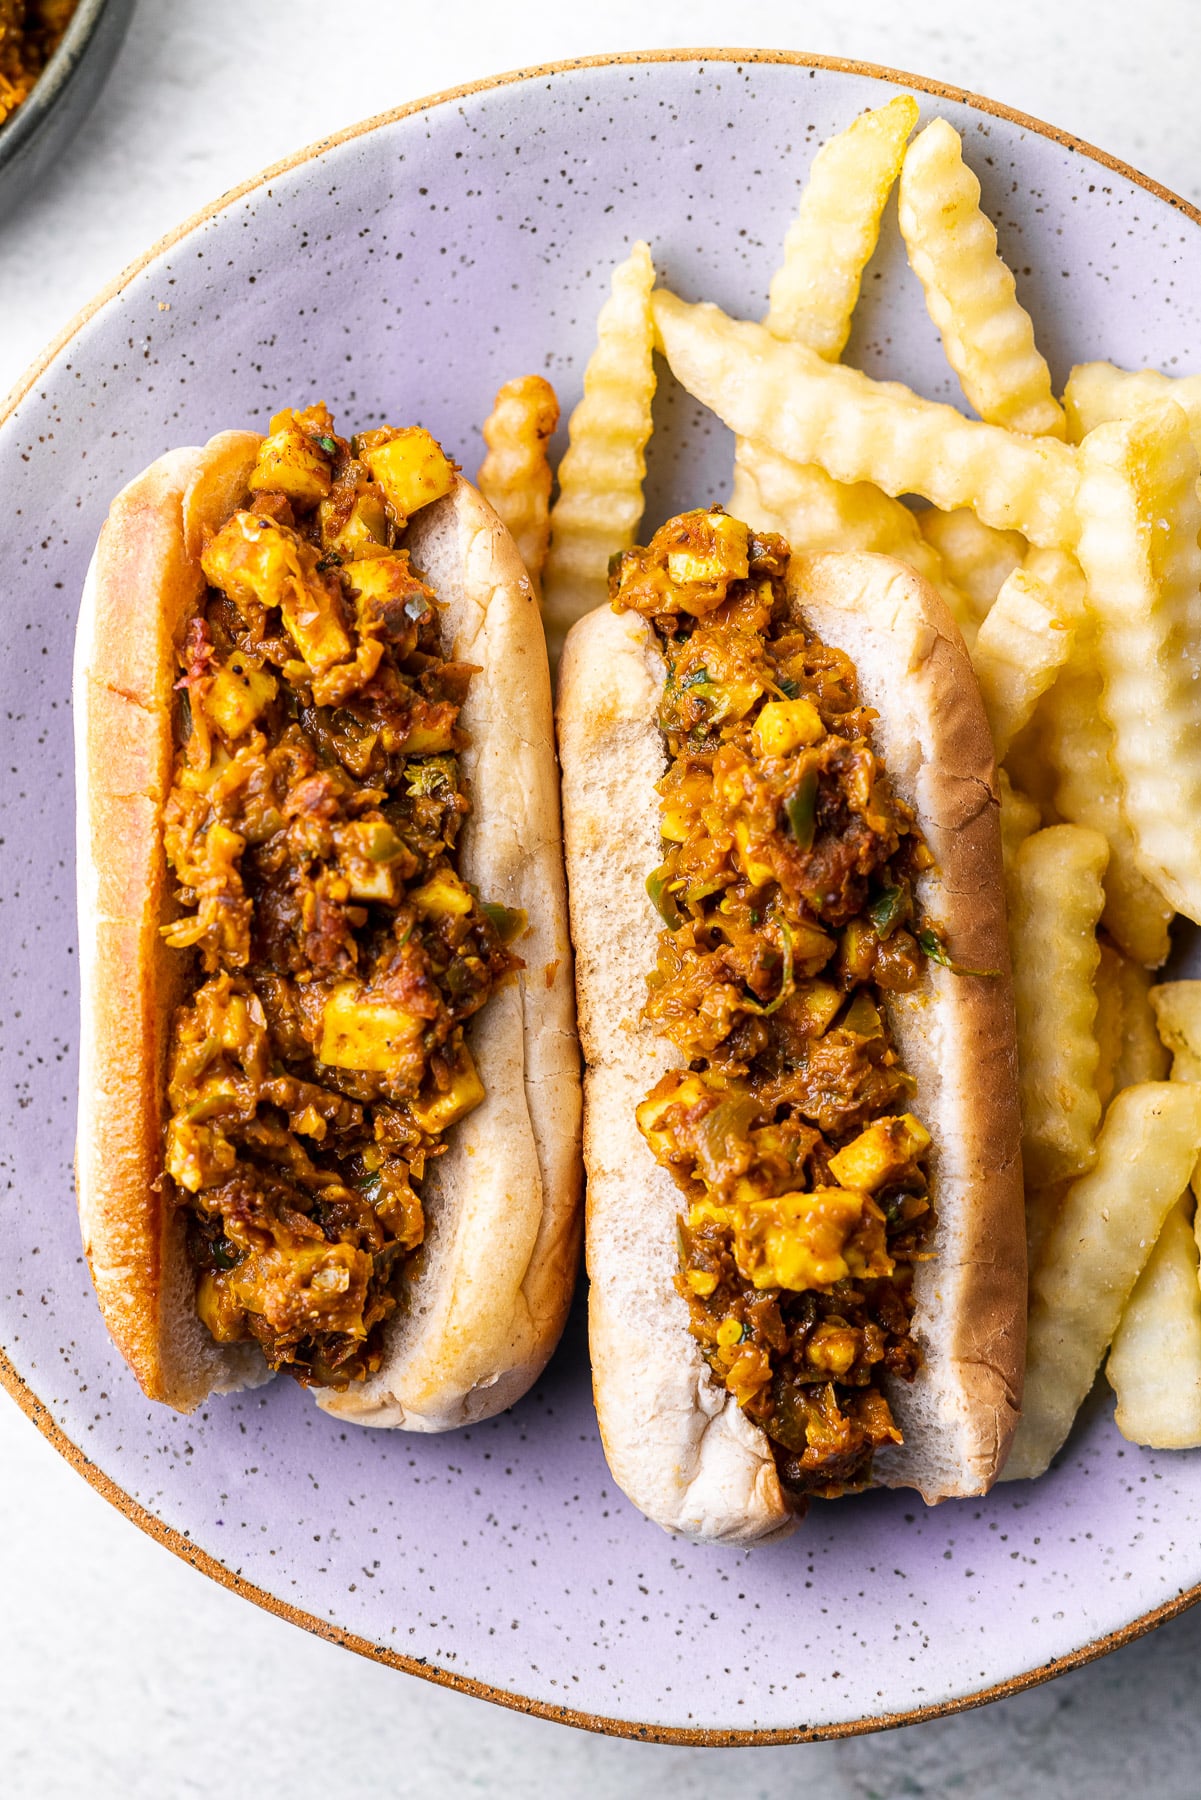 Paneer Masala Filling in hot dog with crinkle fries on a purple plate